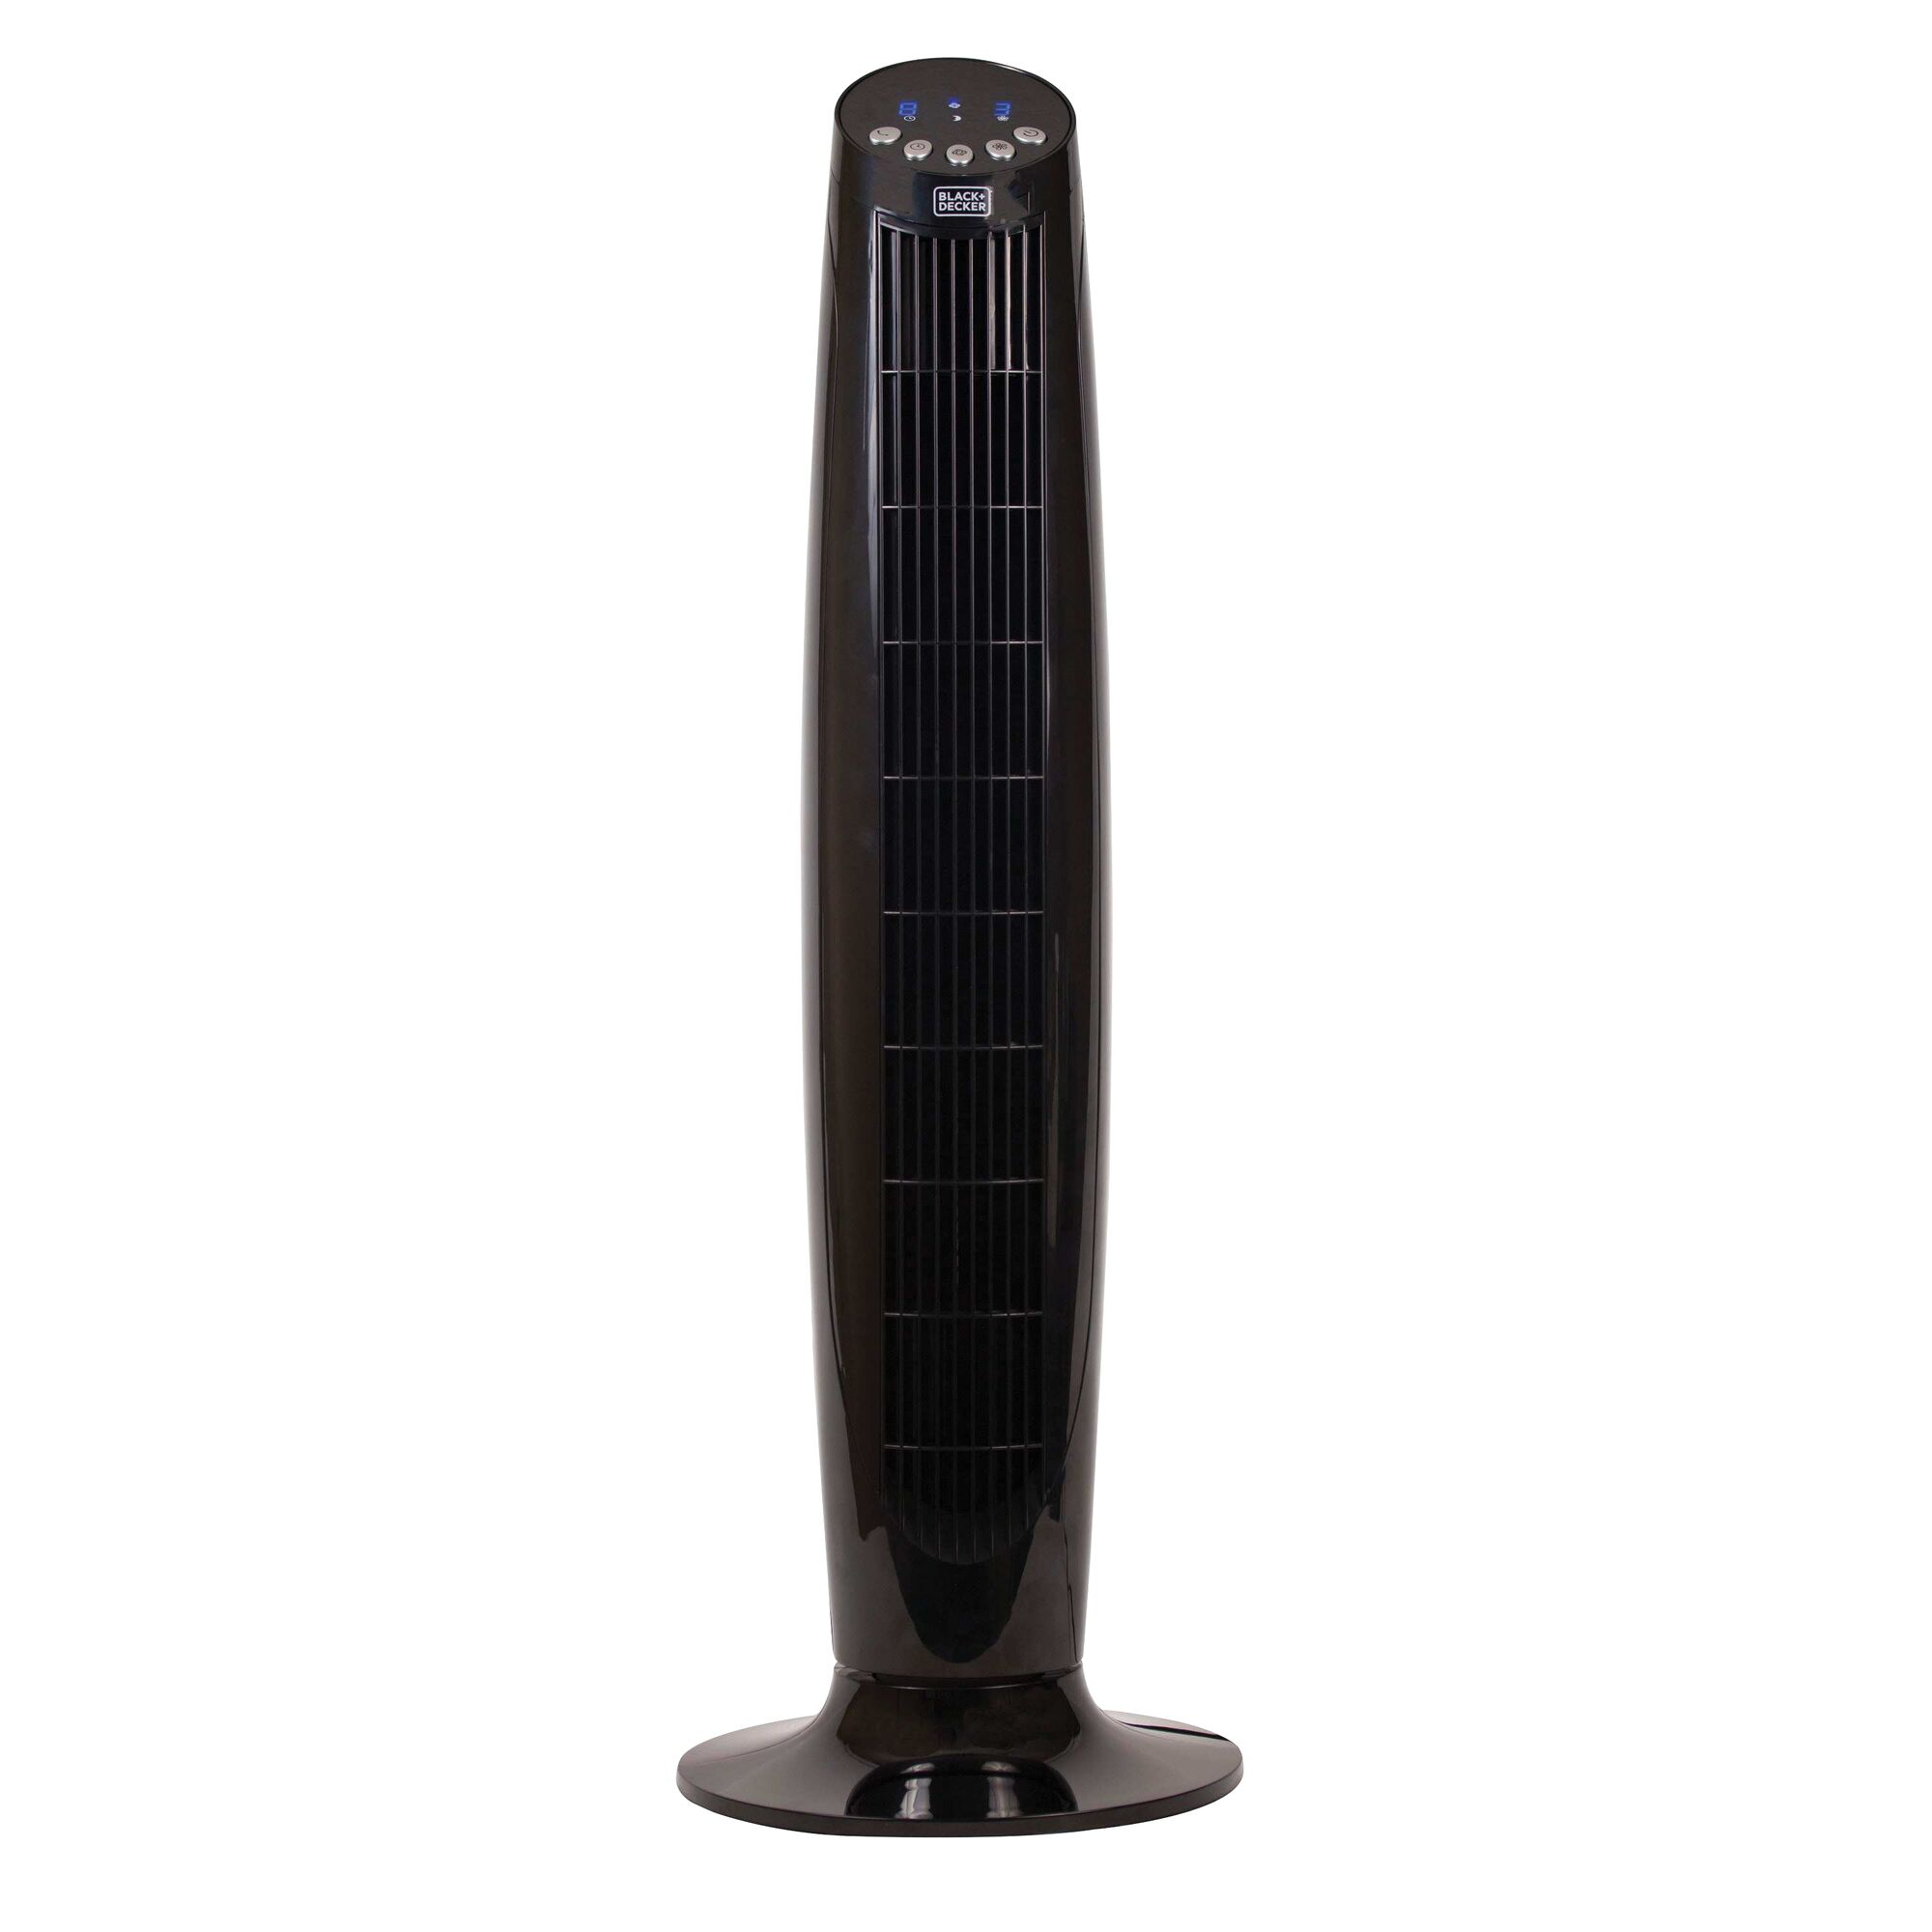 Digital tower fan with remote.